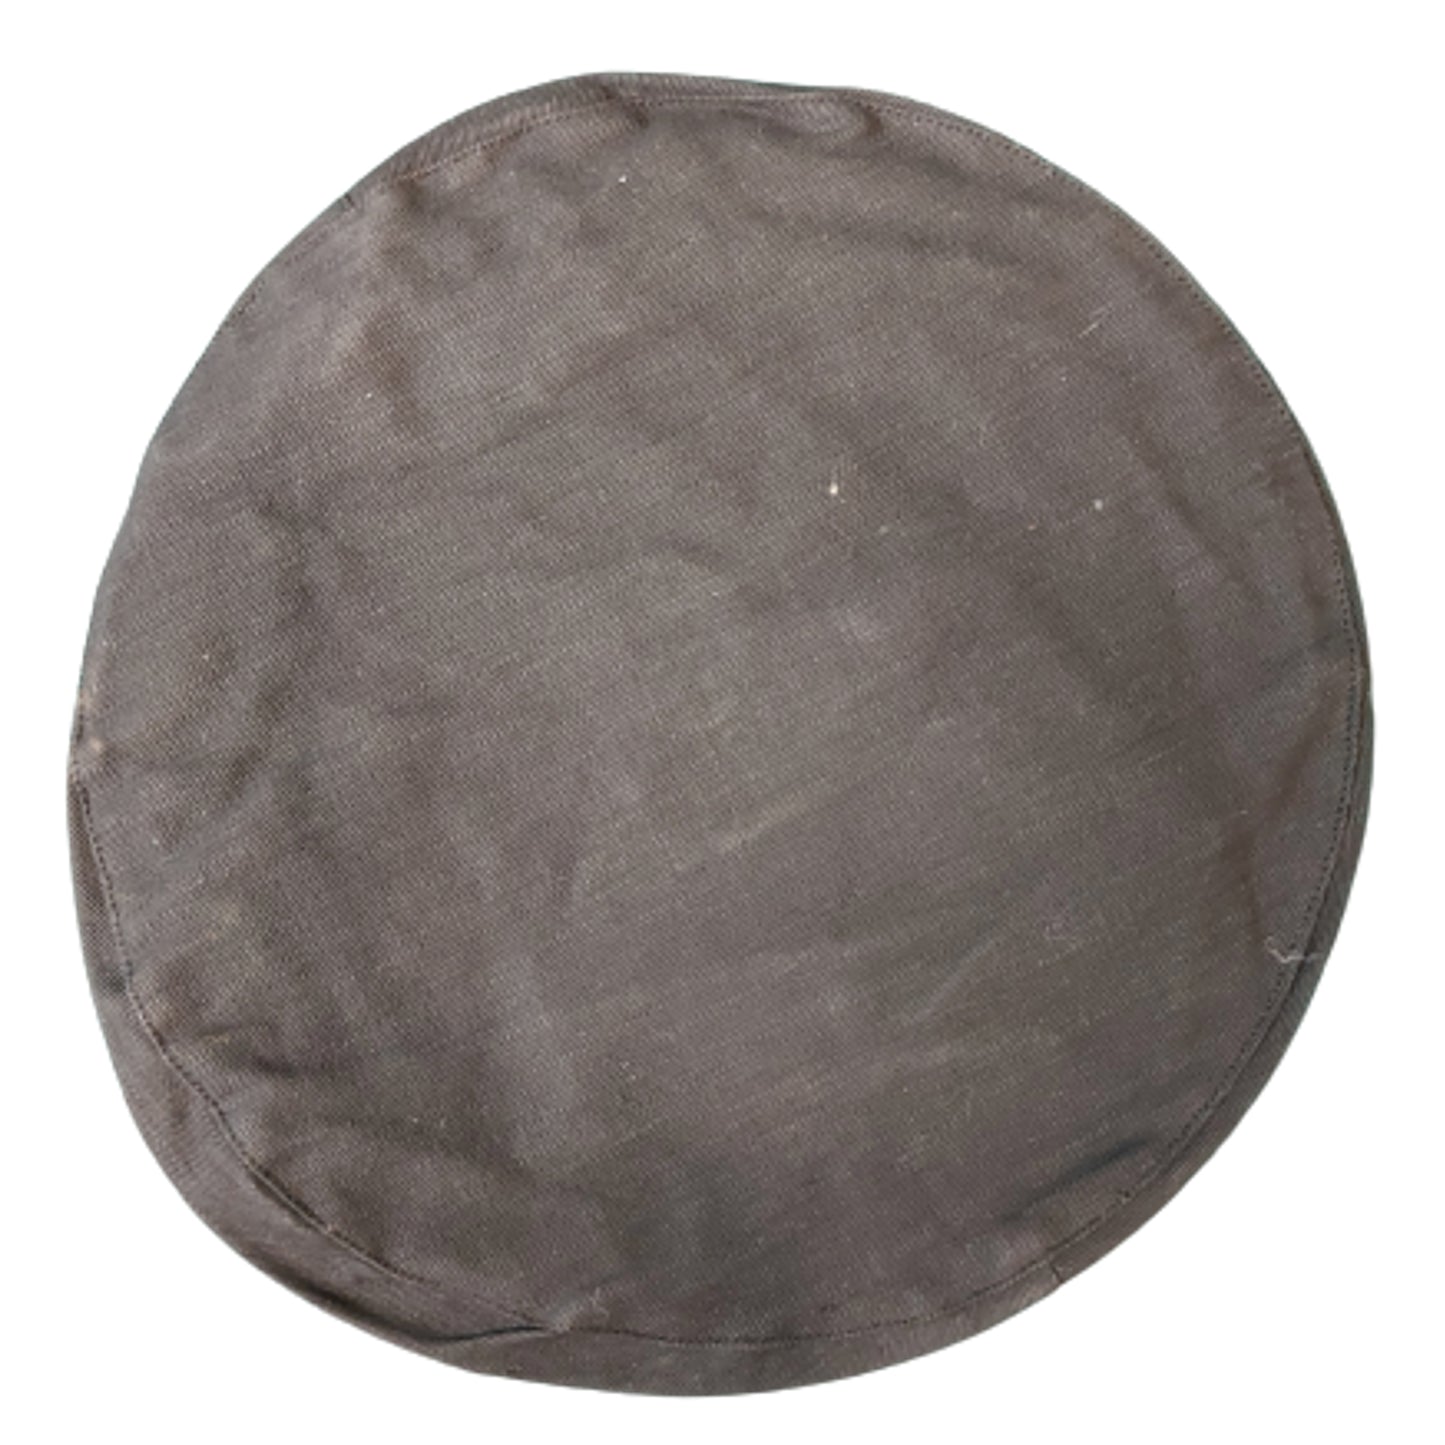 WW2 Canadian Tanker Beret Cover